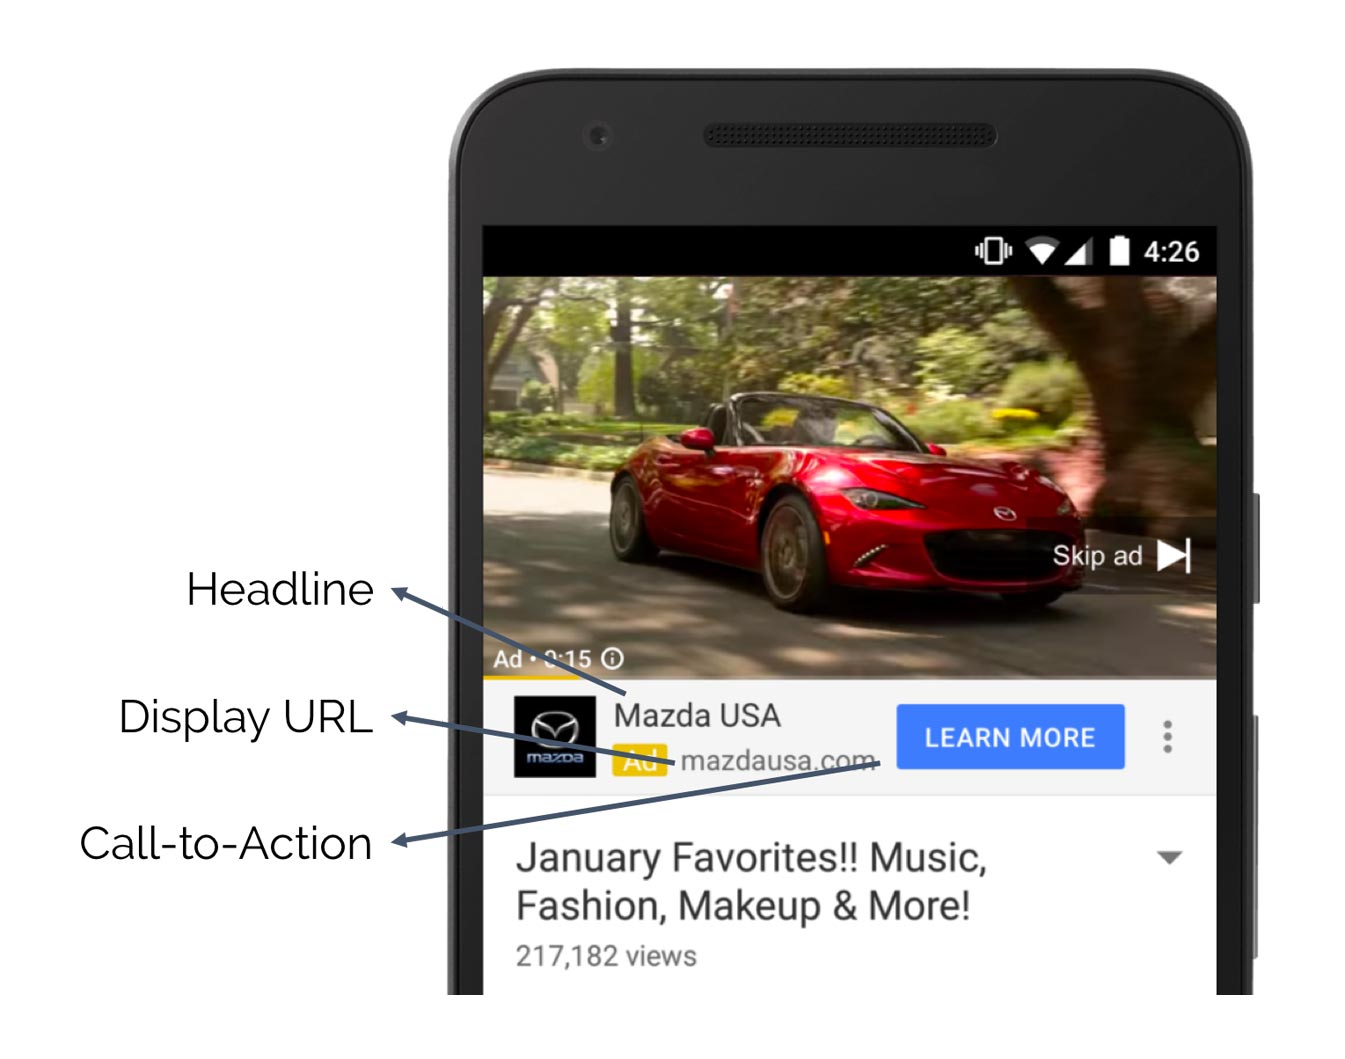 YouTube TrueView video ads